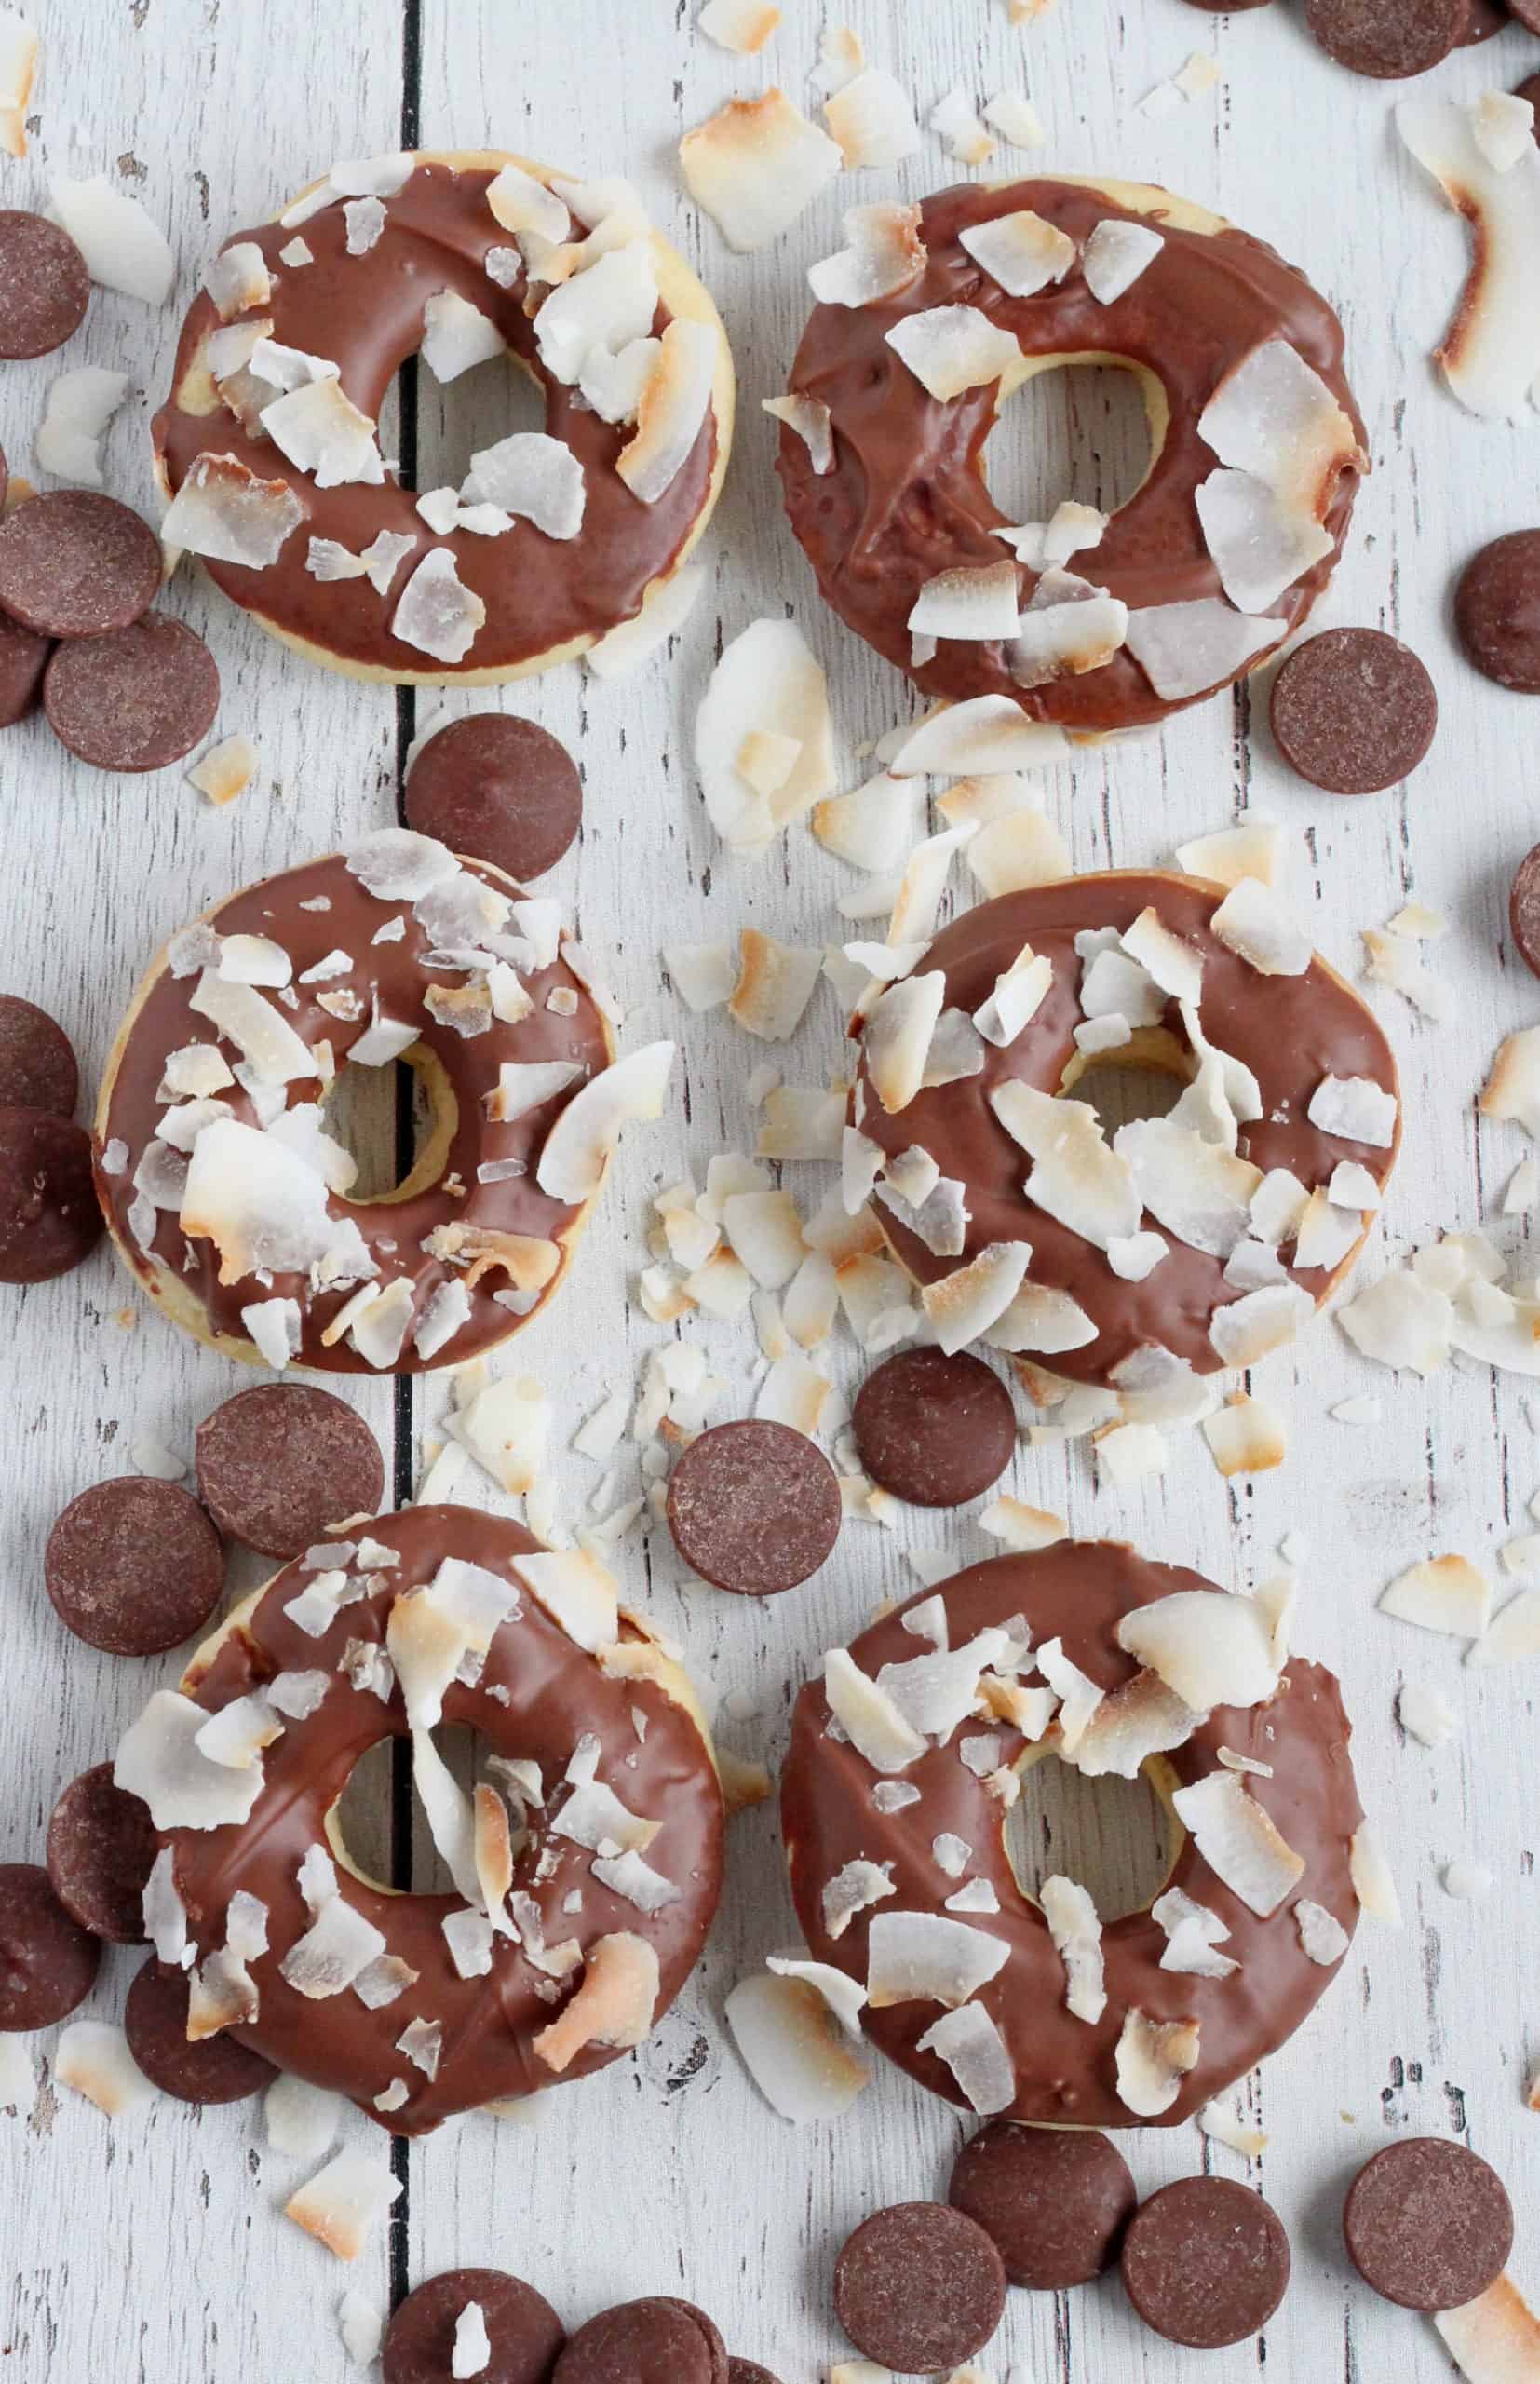 baked donut covered in chocolate and coconut flakes